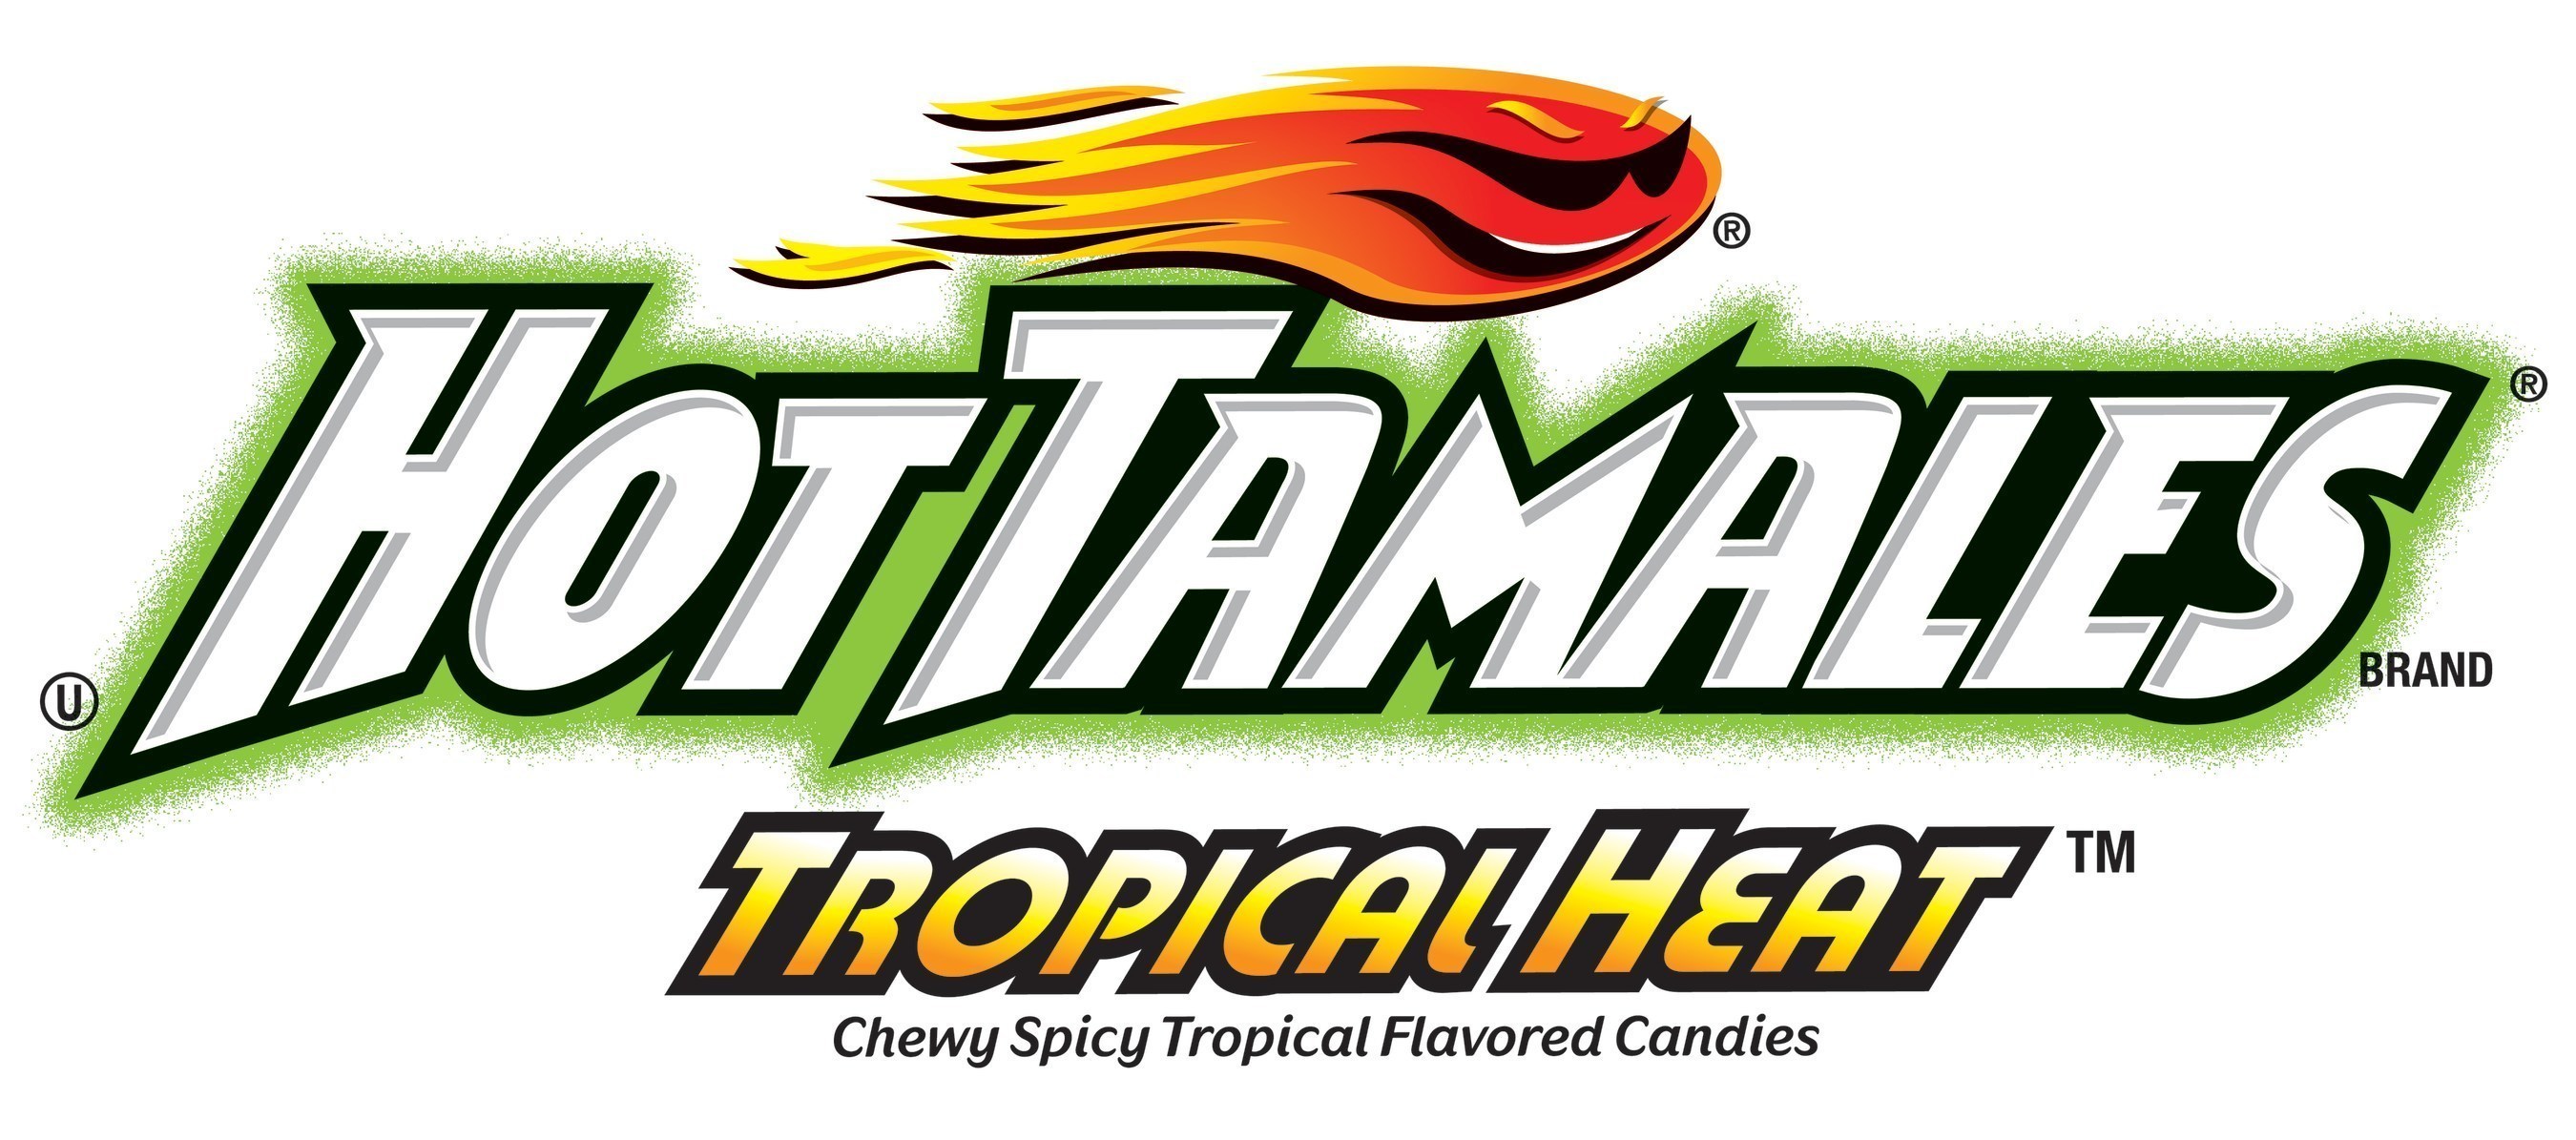 America's #1 cinnamon confection HOT TAMALES(R), announced today that its spicy fruit variety TROPICAL HEAT(TM) is launching nationally.